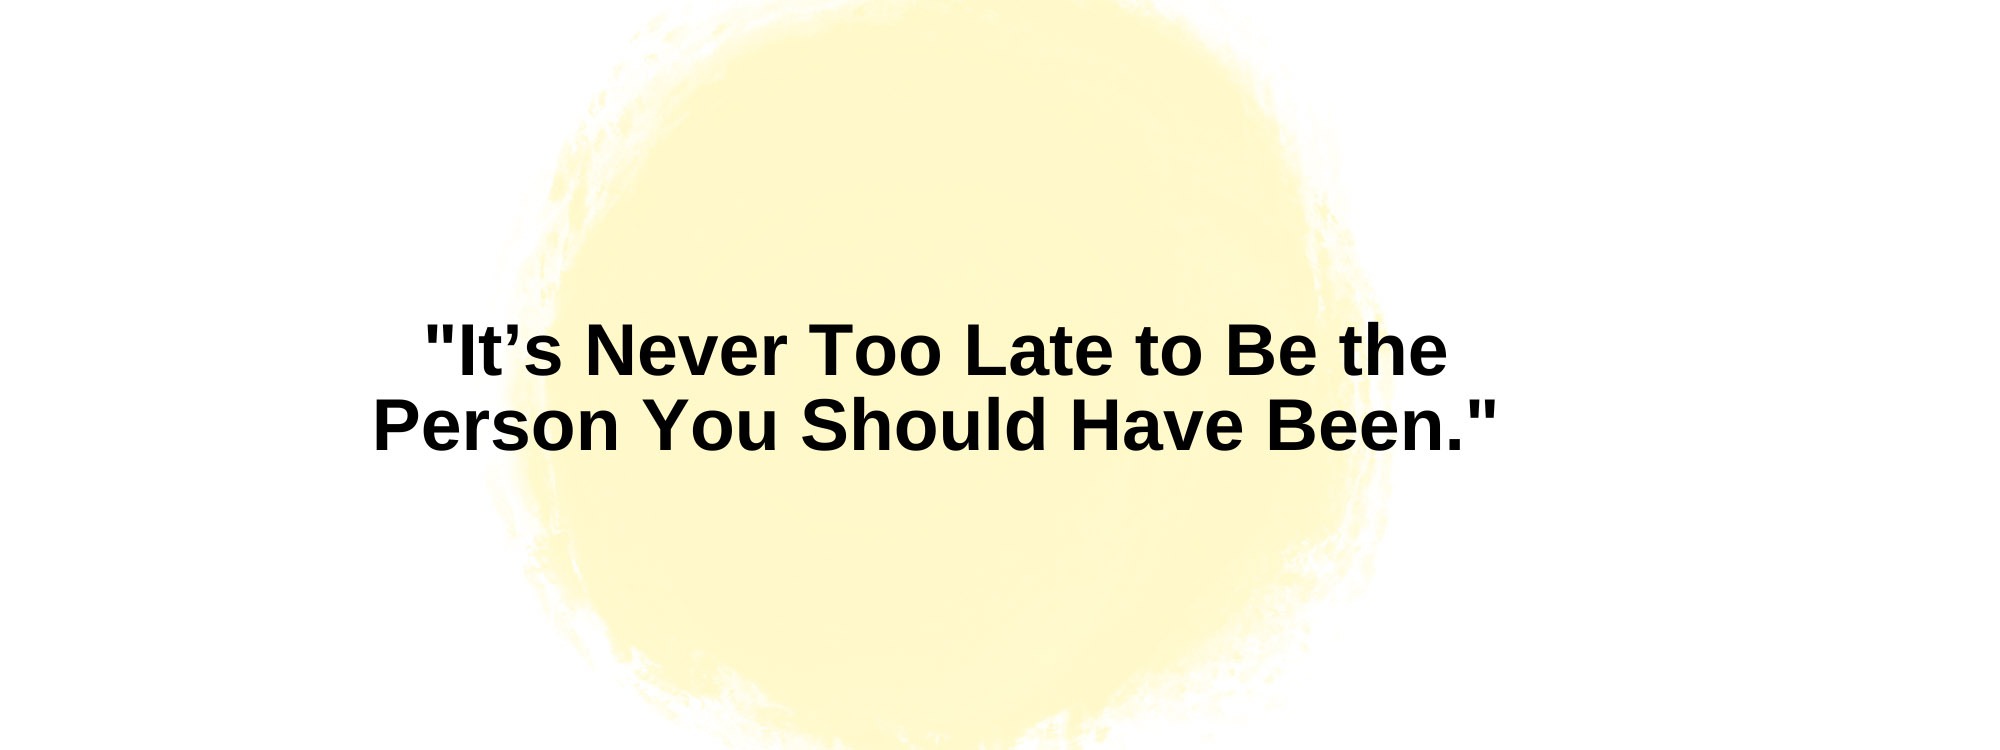 It's never too late to be the person you should have been